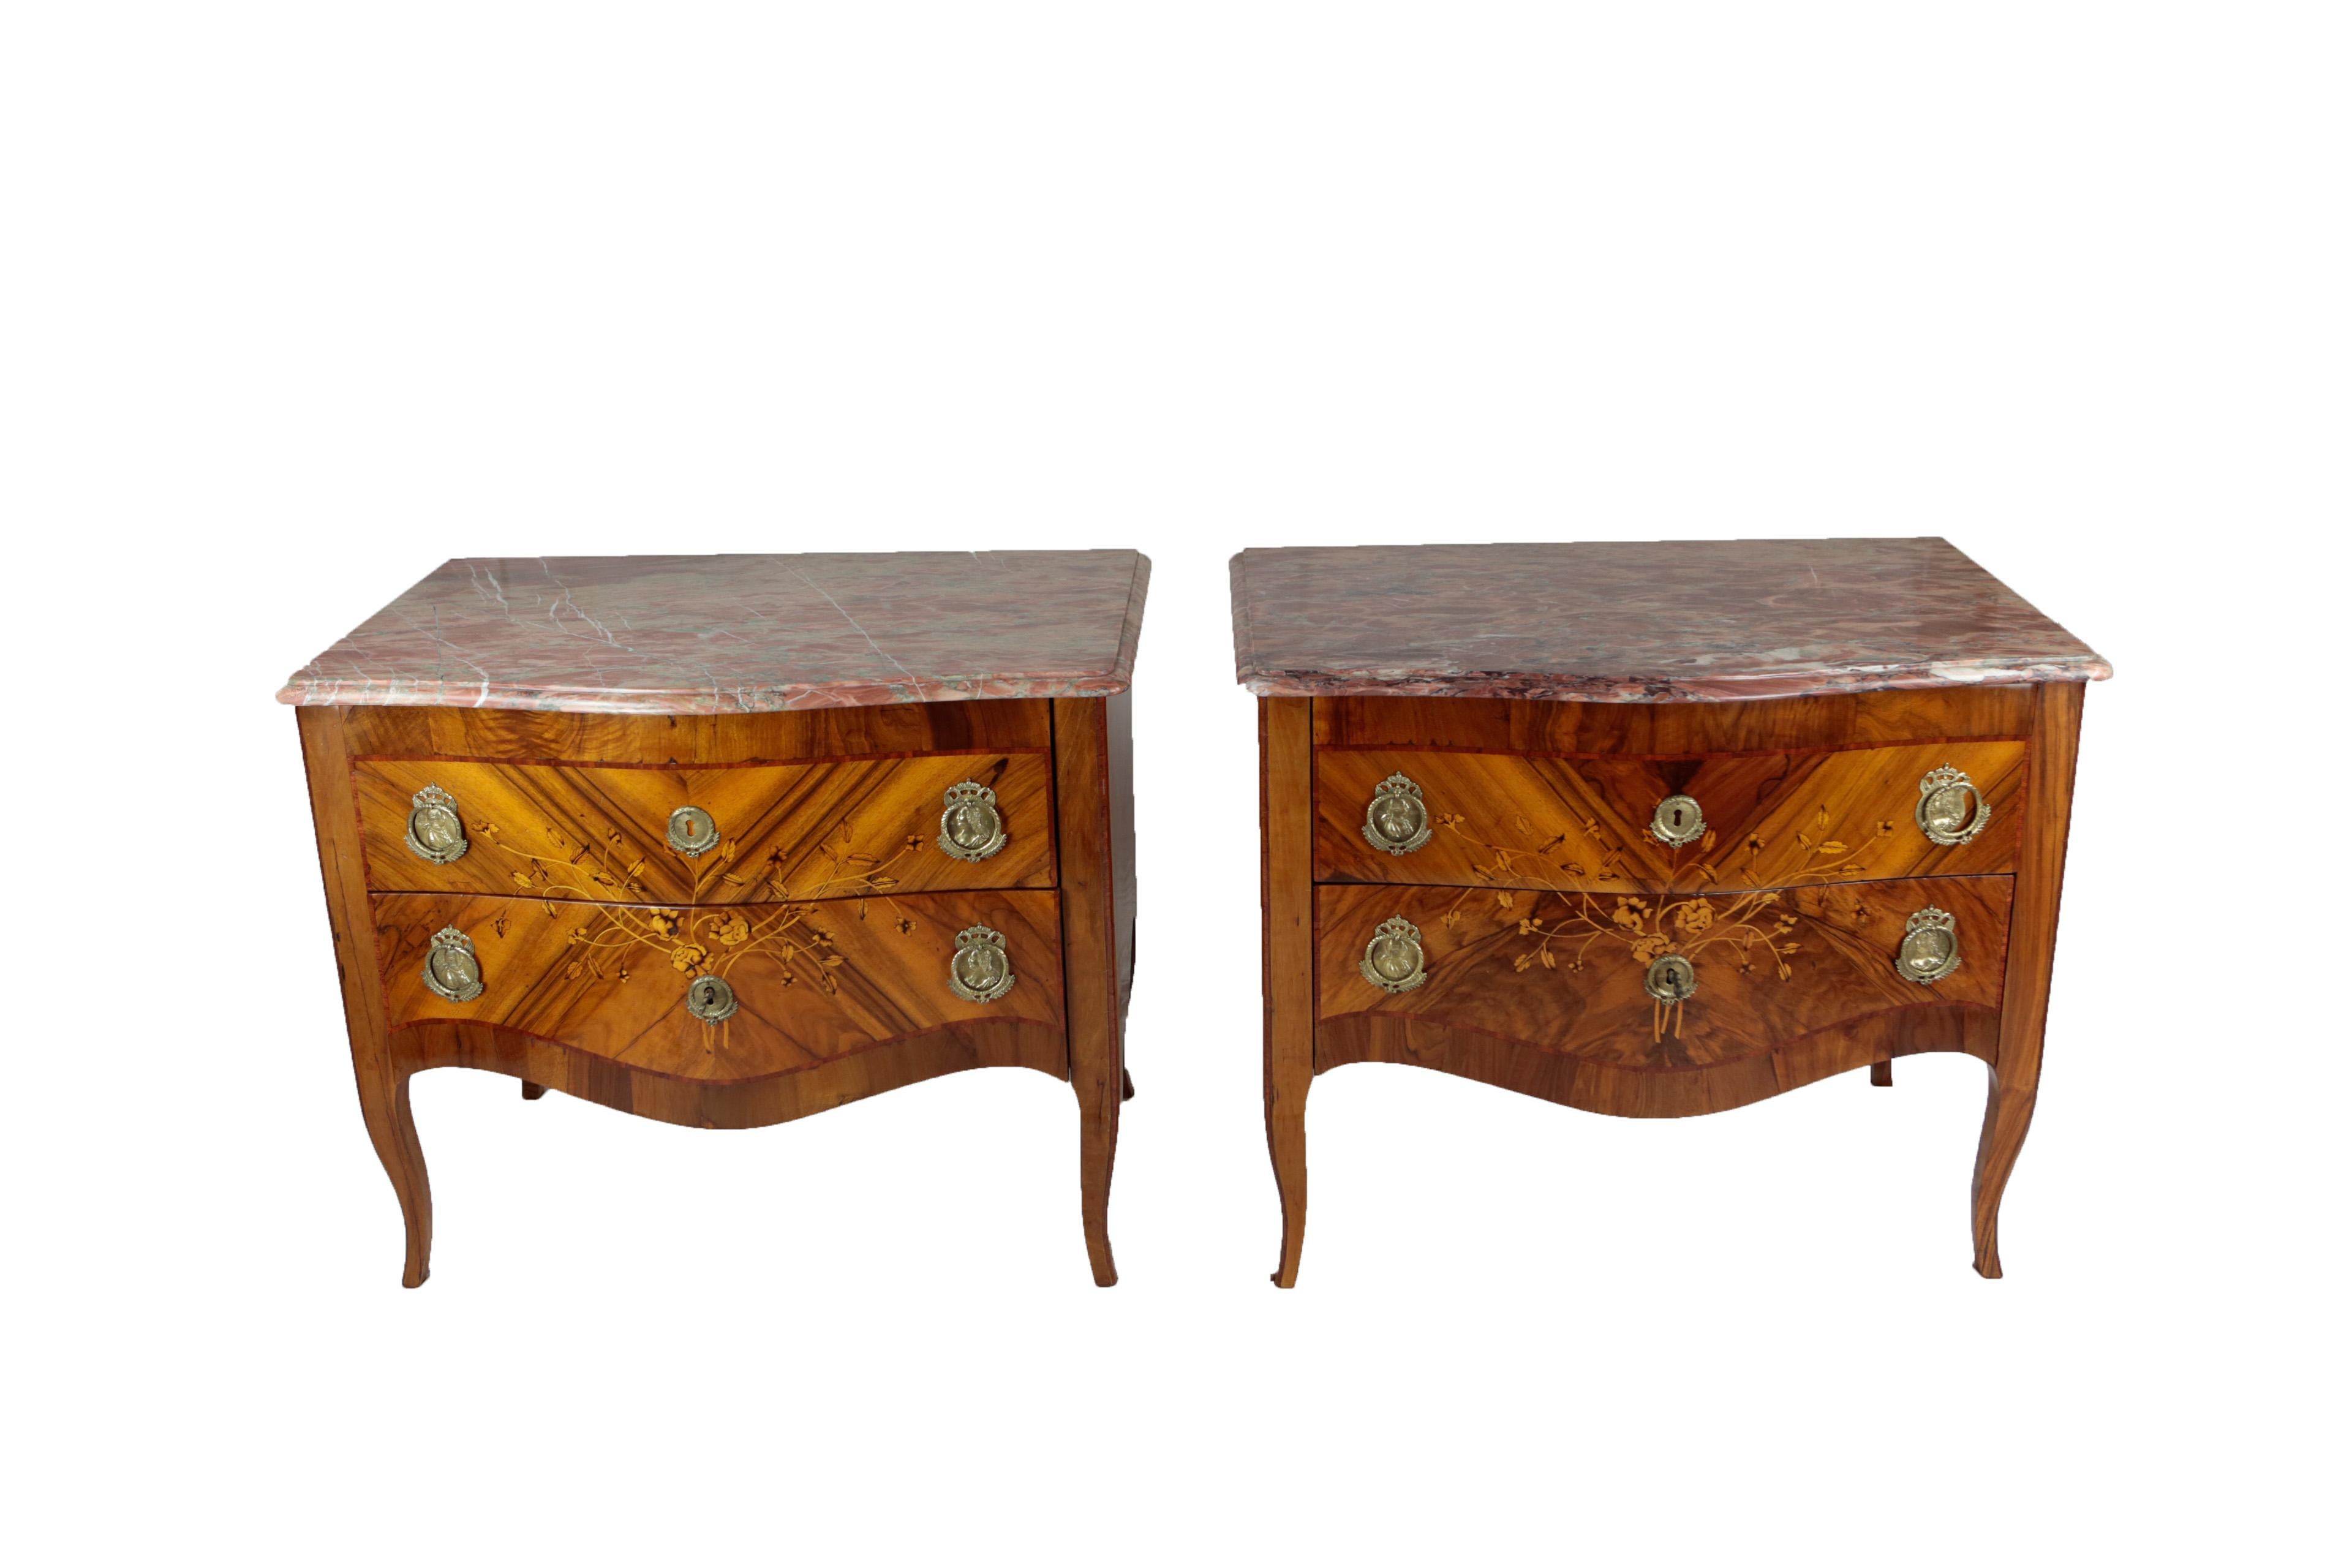 Beautiful pair of chest of drawers from Austria, circa 1760-1770, 2 drawers, nutwood and mahogany veneered, reddish marble top, marquetry with several real woods, floral ornaments, original brass fittings with portraits of Mary Therese of Austria